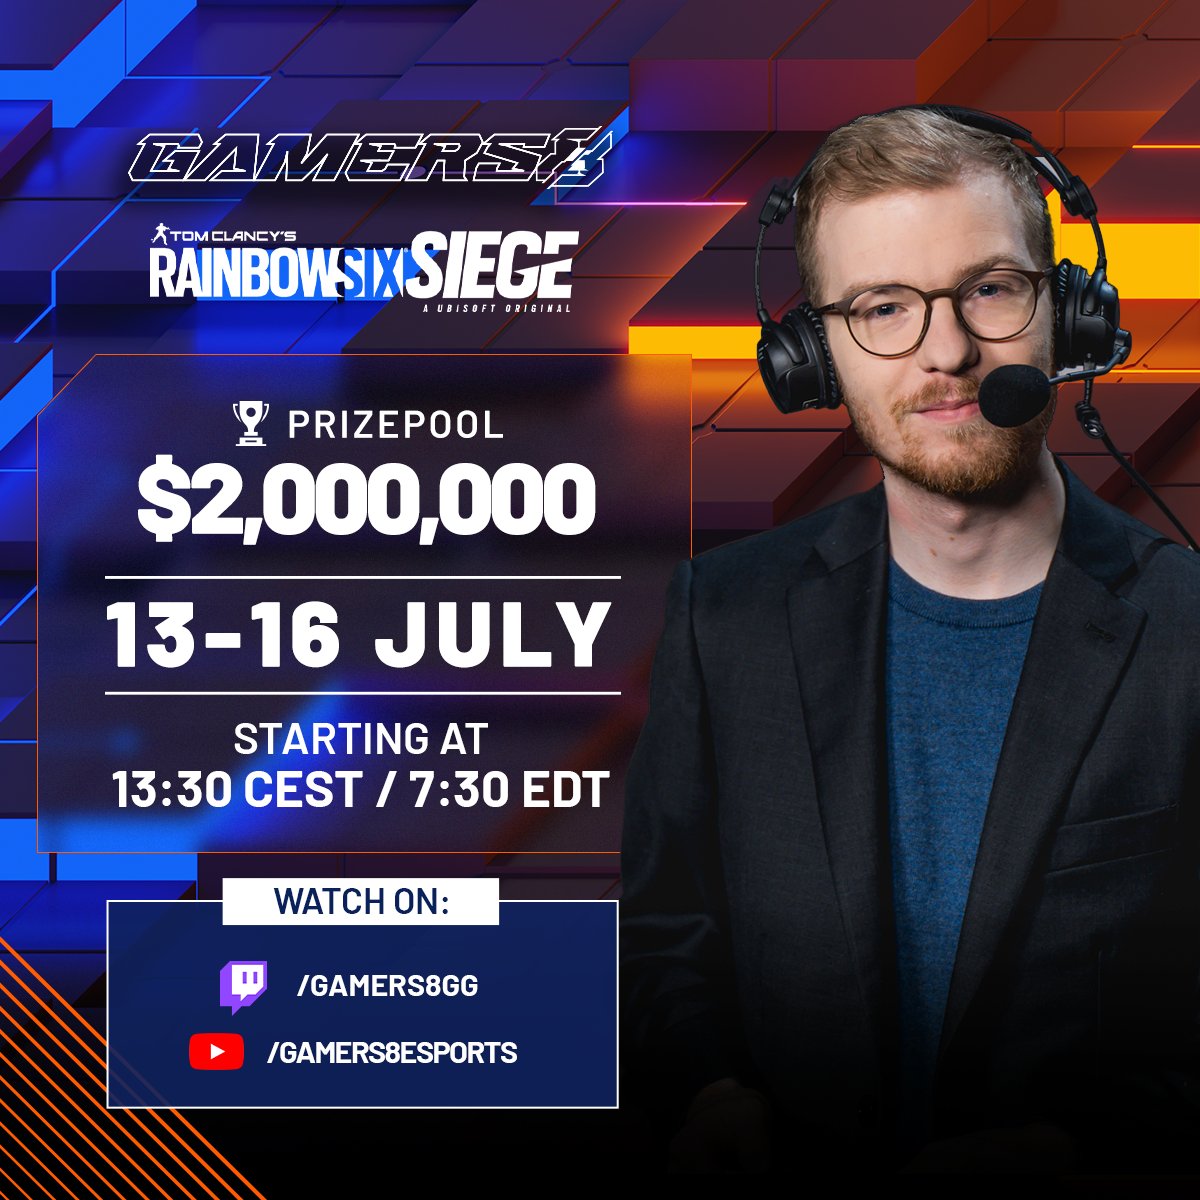 Guess what! I'll be co-streaming the Tier 1 event of G8. FINALLY, WE'RE BACK WITH SOME TIER 1 SIEGE.
The dates are 13-14-15-16 of July 🥰

#Gamers8 #TheLandOfHeroes #Ad